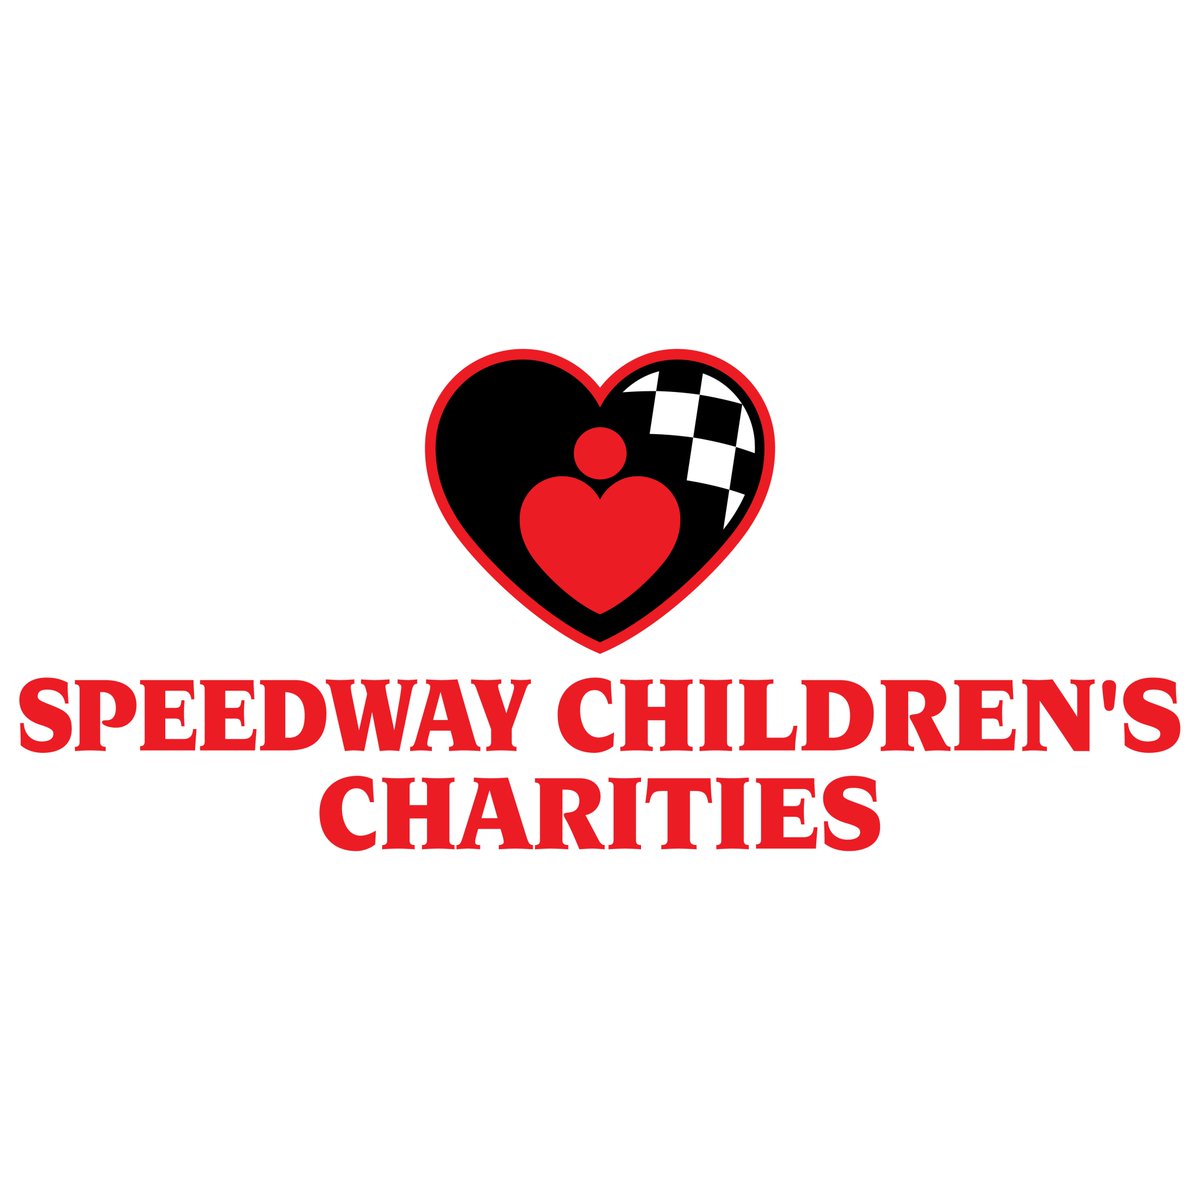 Speedway Children’s Charities mission is to put children at the center of everything we do. Stay involved by visiting speedwaycharities.org/lasvegas